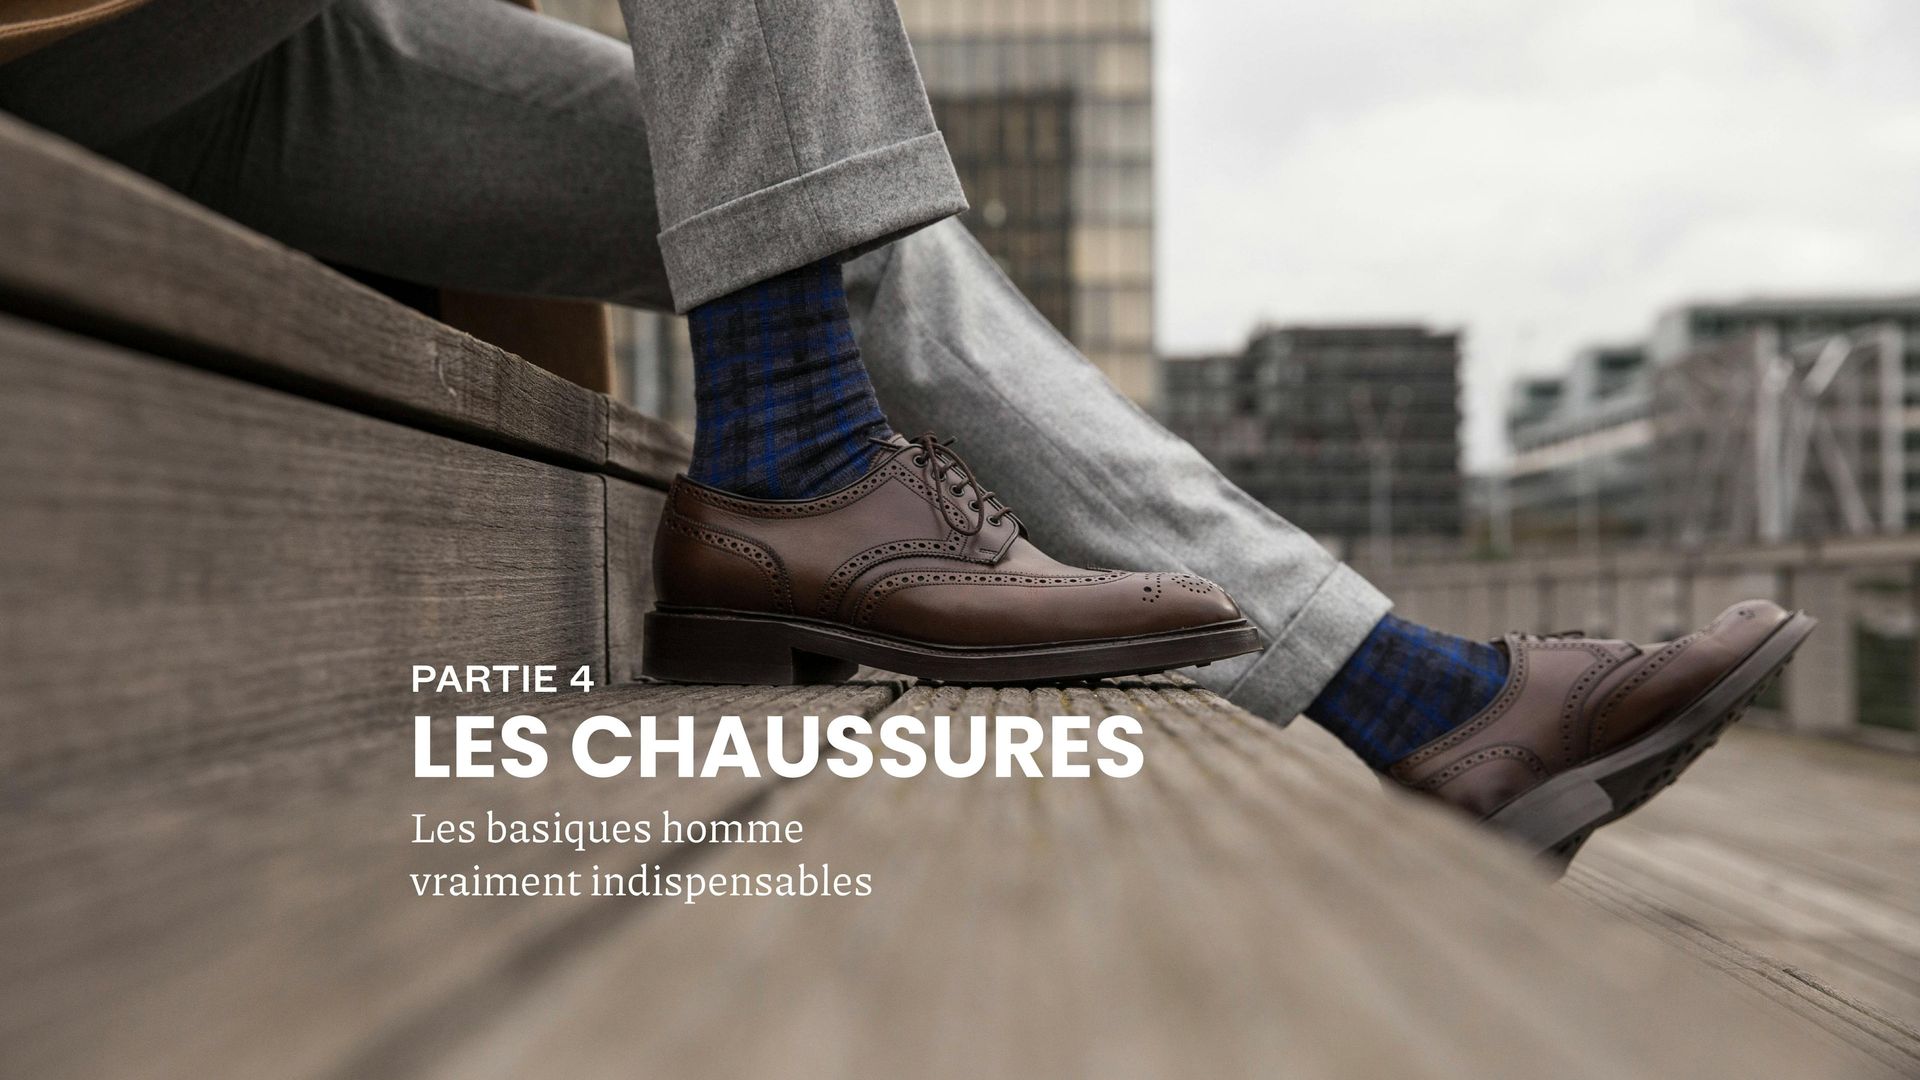 Hommes running chaussures mode haute aide sneakers casual marche